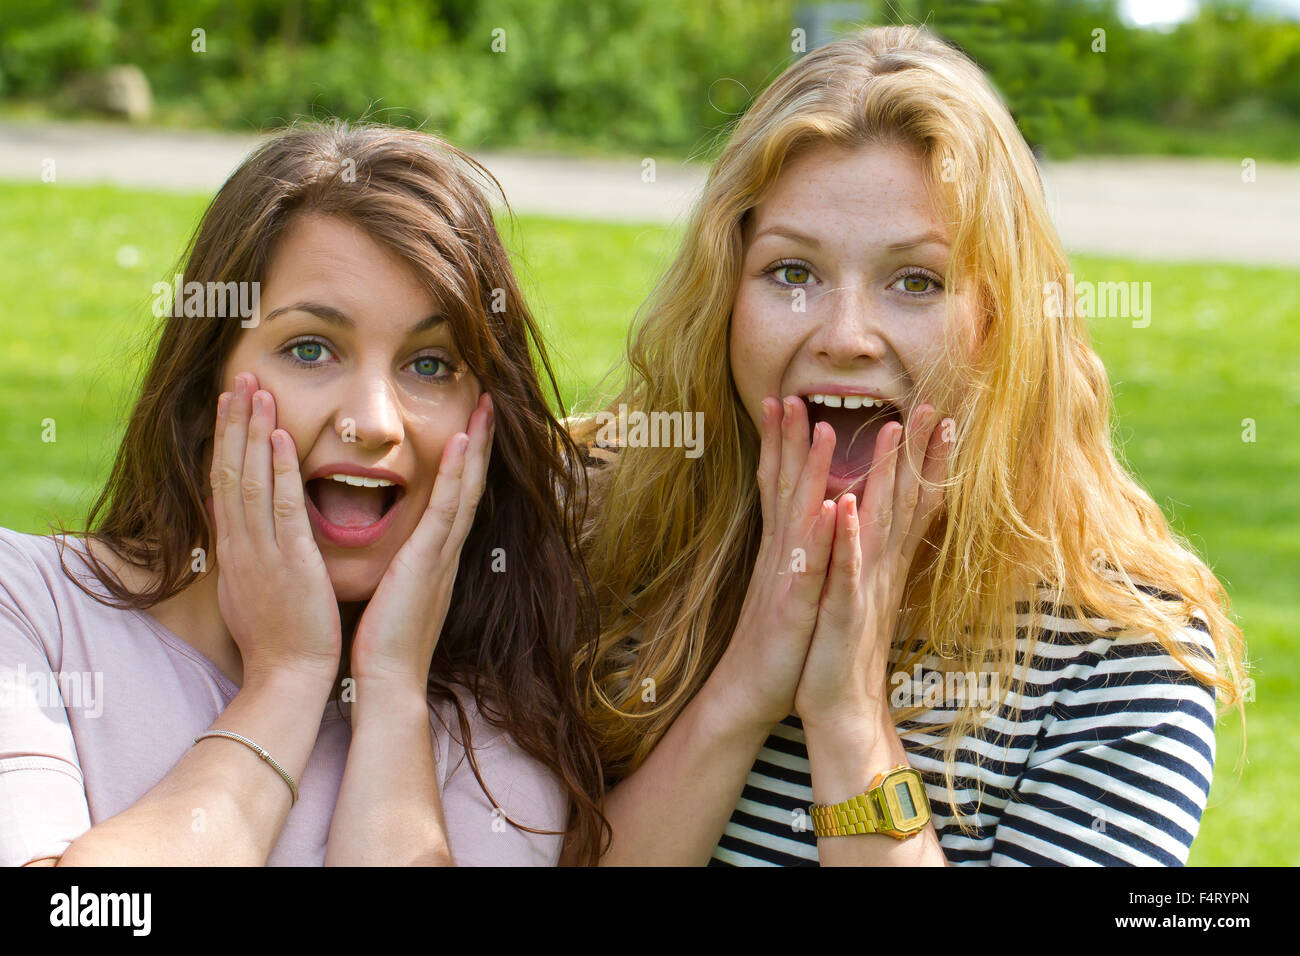 Two surprised girls Stock Photo